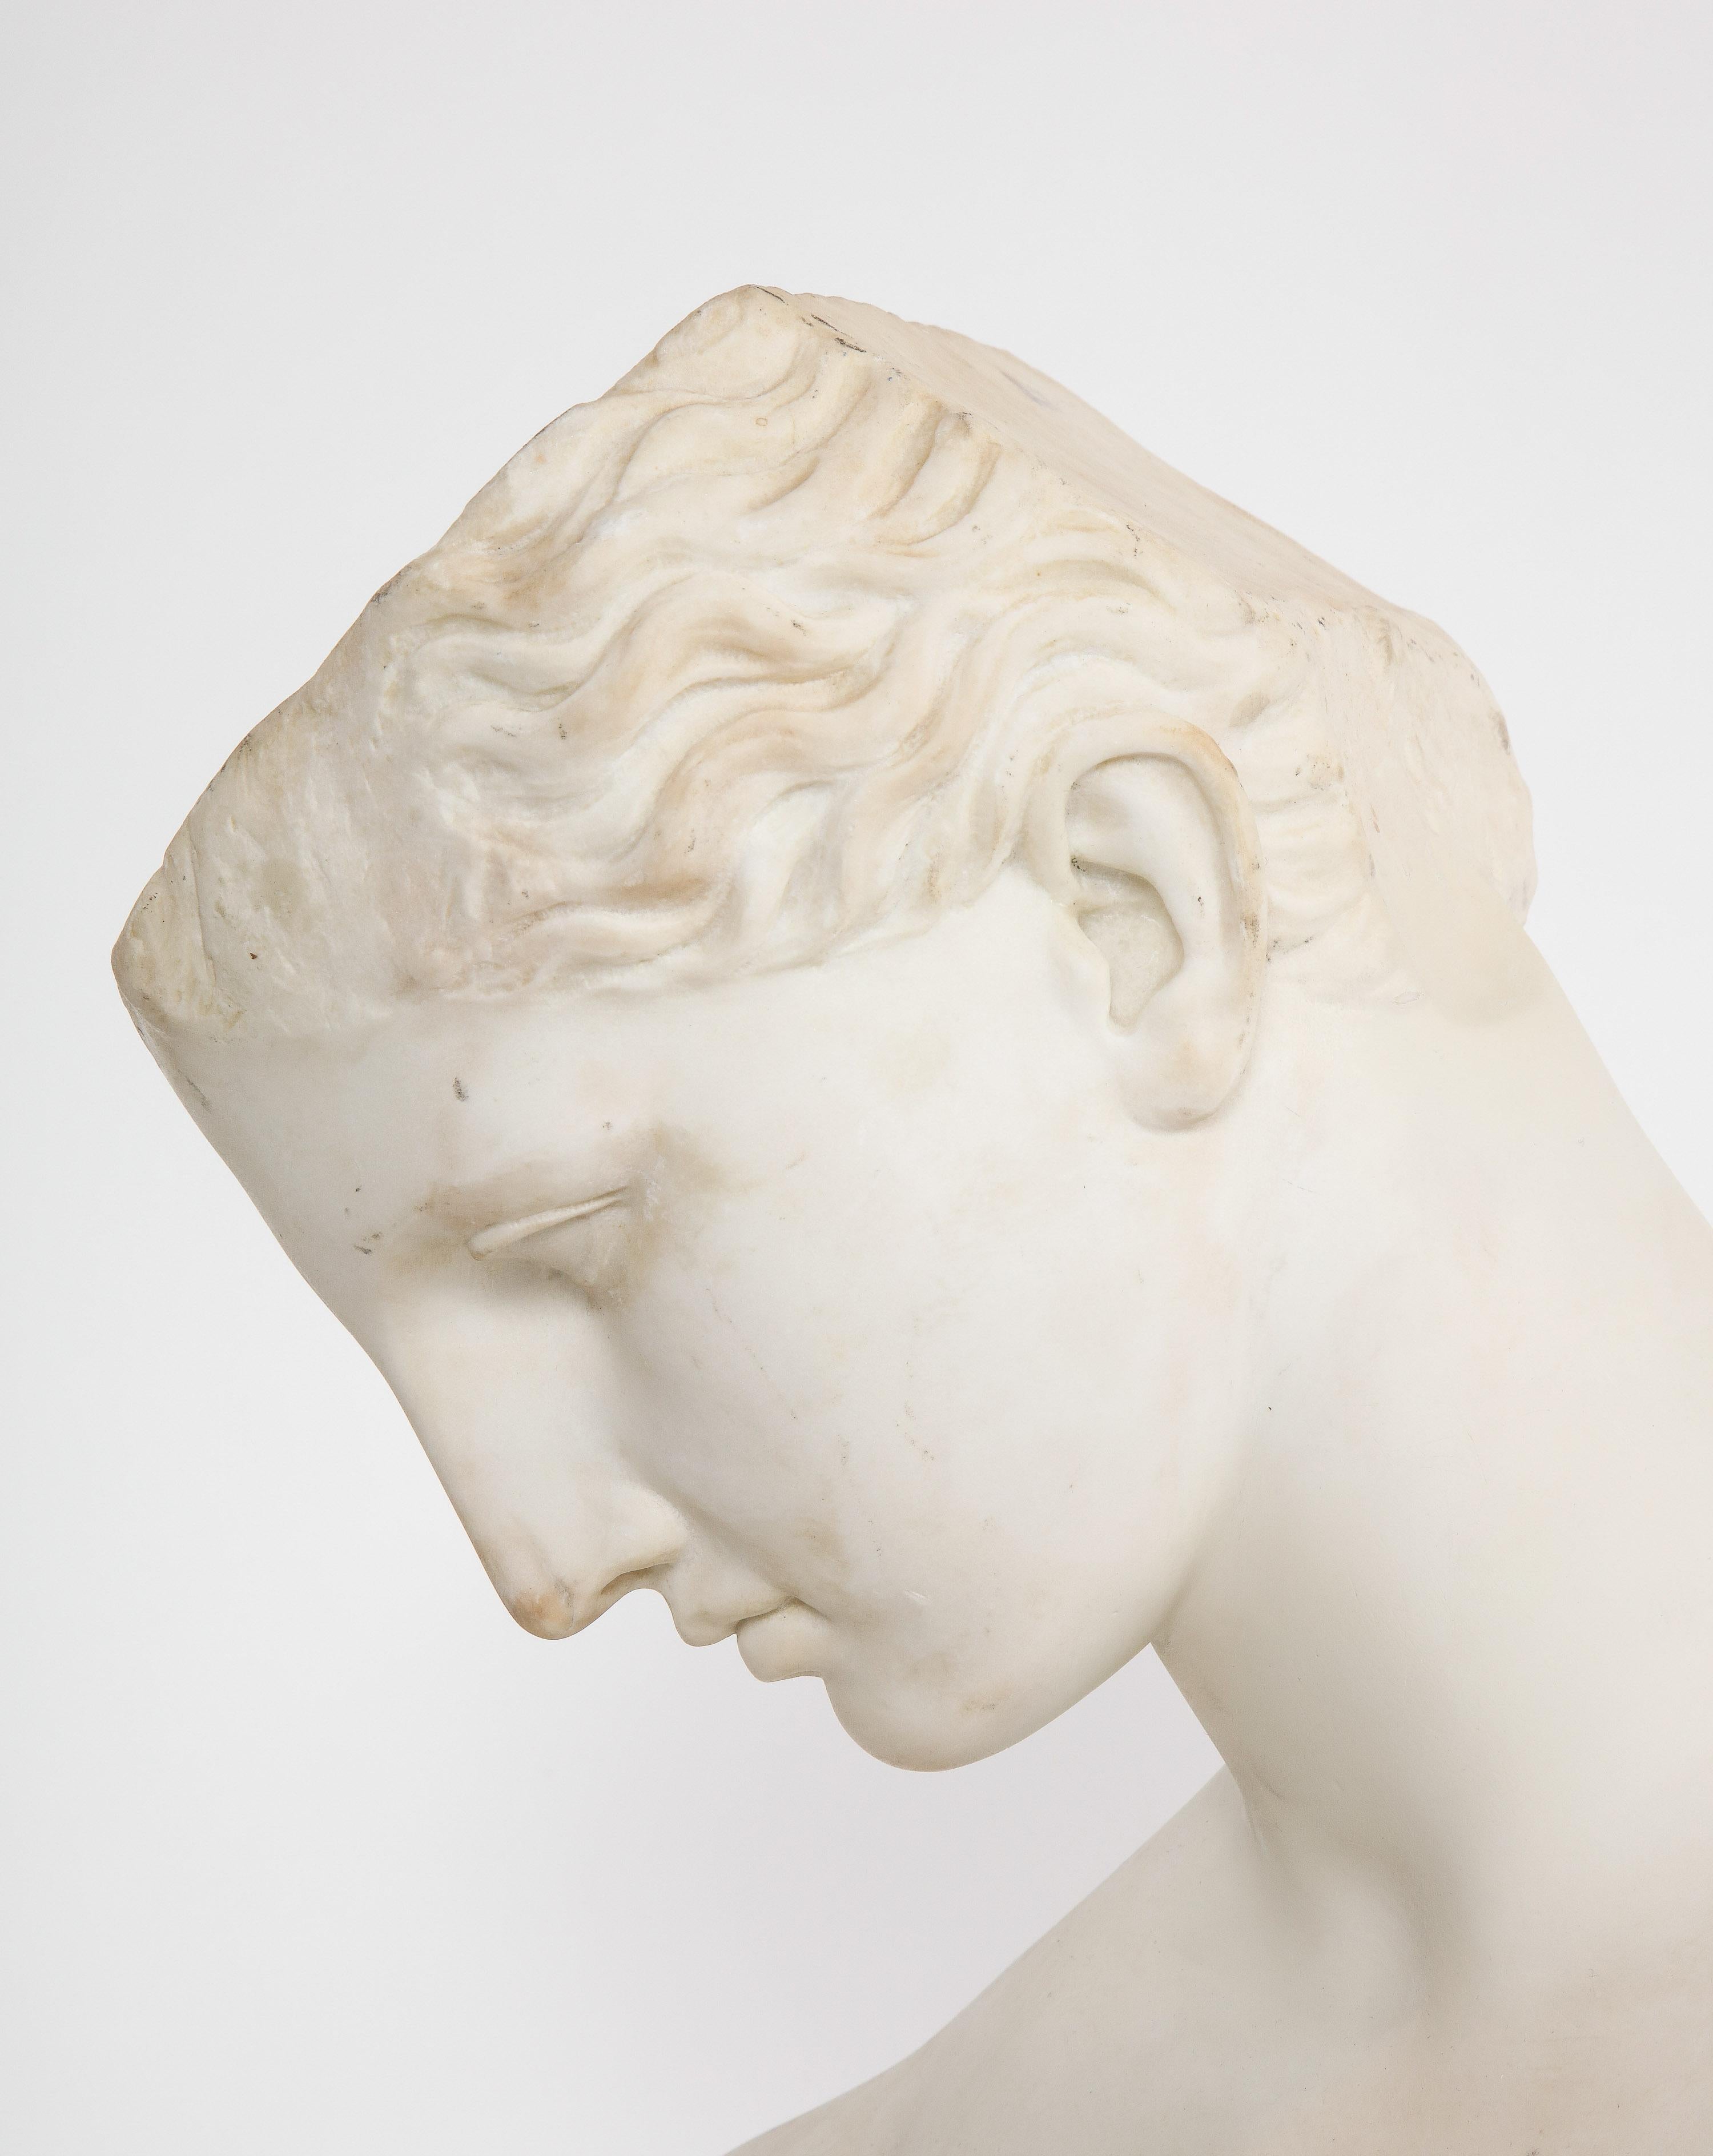 Antique Italian Neoclassical Marble Bust of Psyche, by Giuseppe Carnevale 1